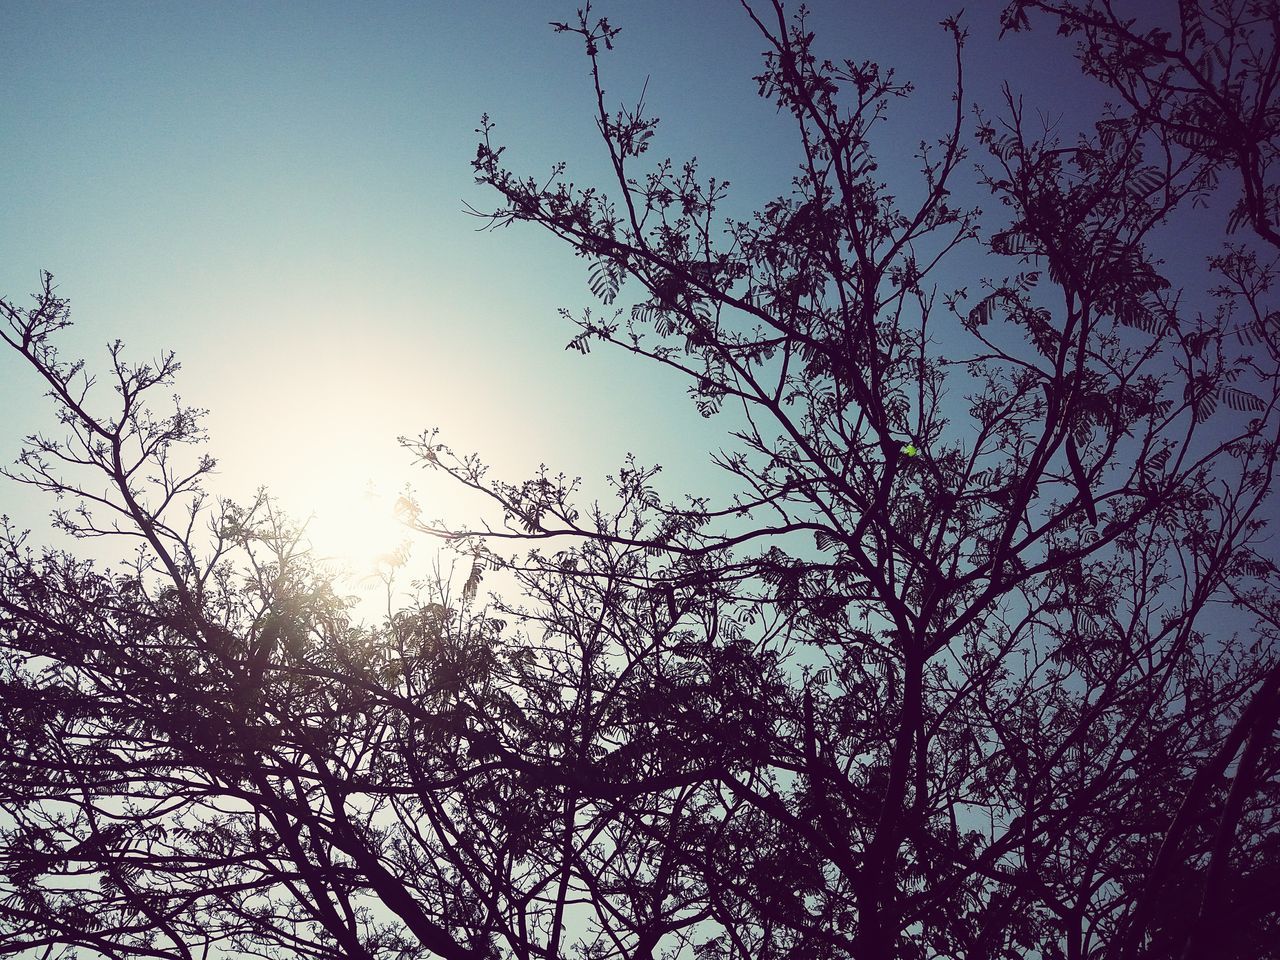 nature, tree, sky, sunset, no people, beauty in nature, growth, outdoors, silhouette, tranquility, close-up, branch, day